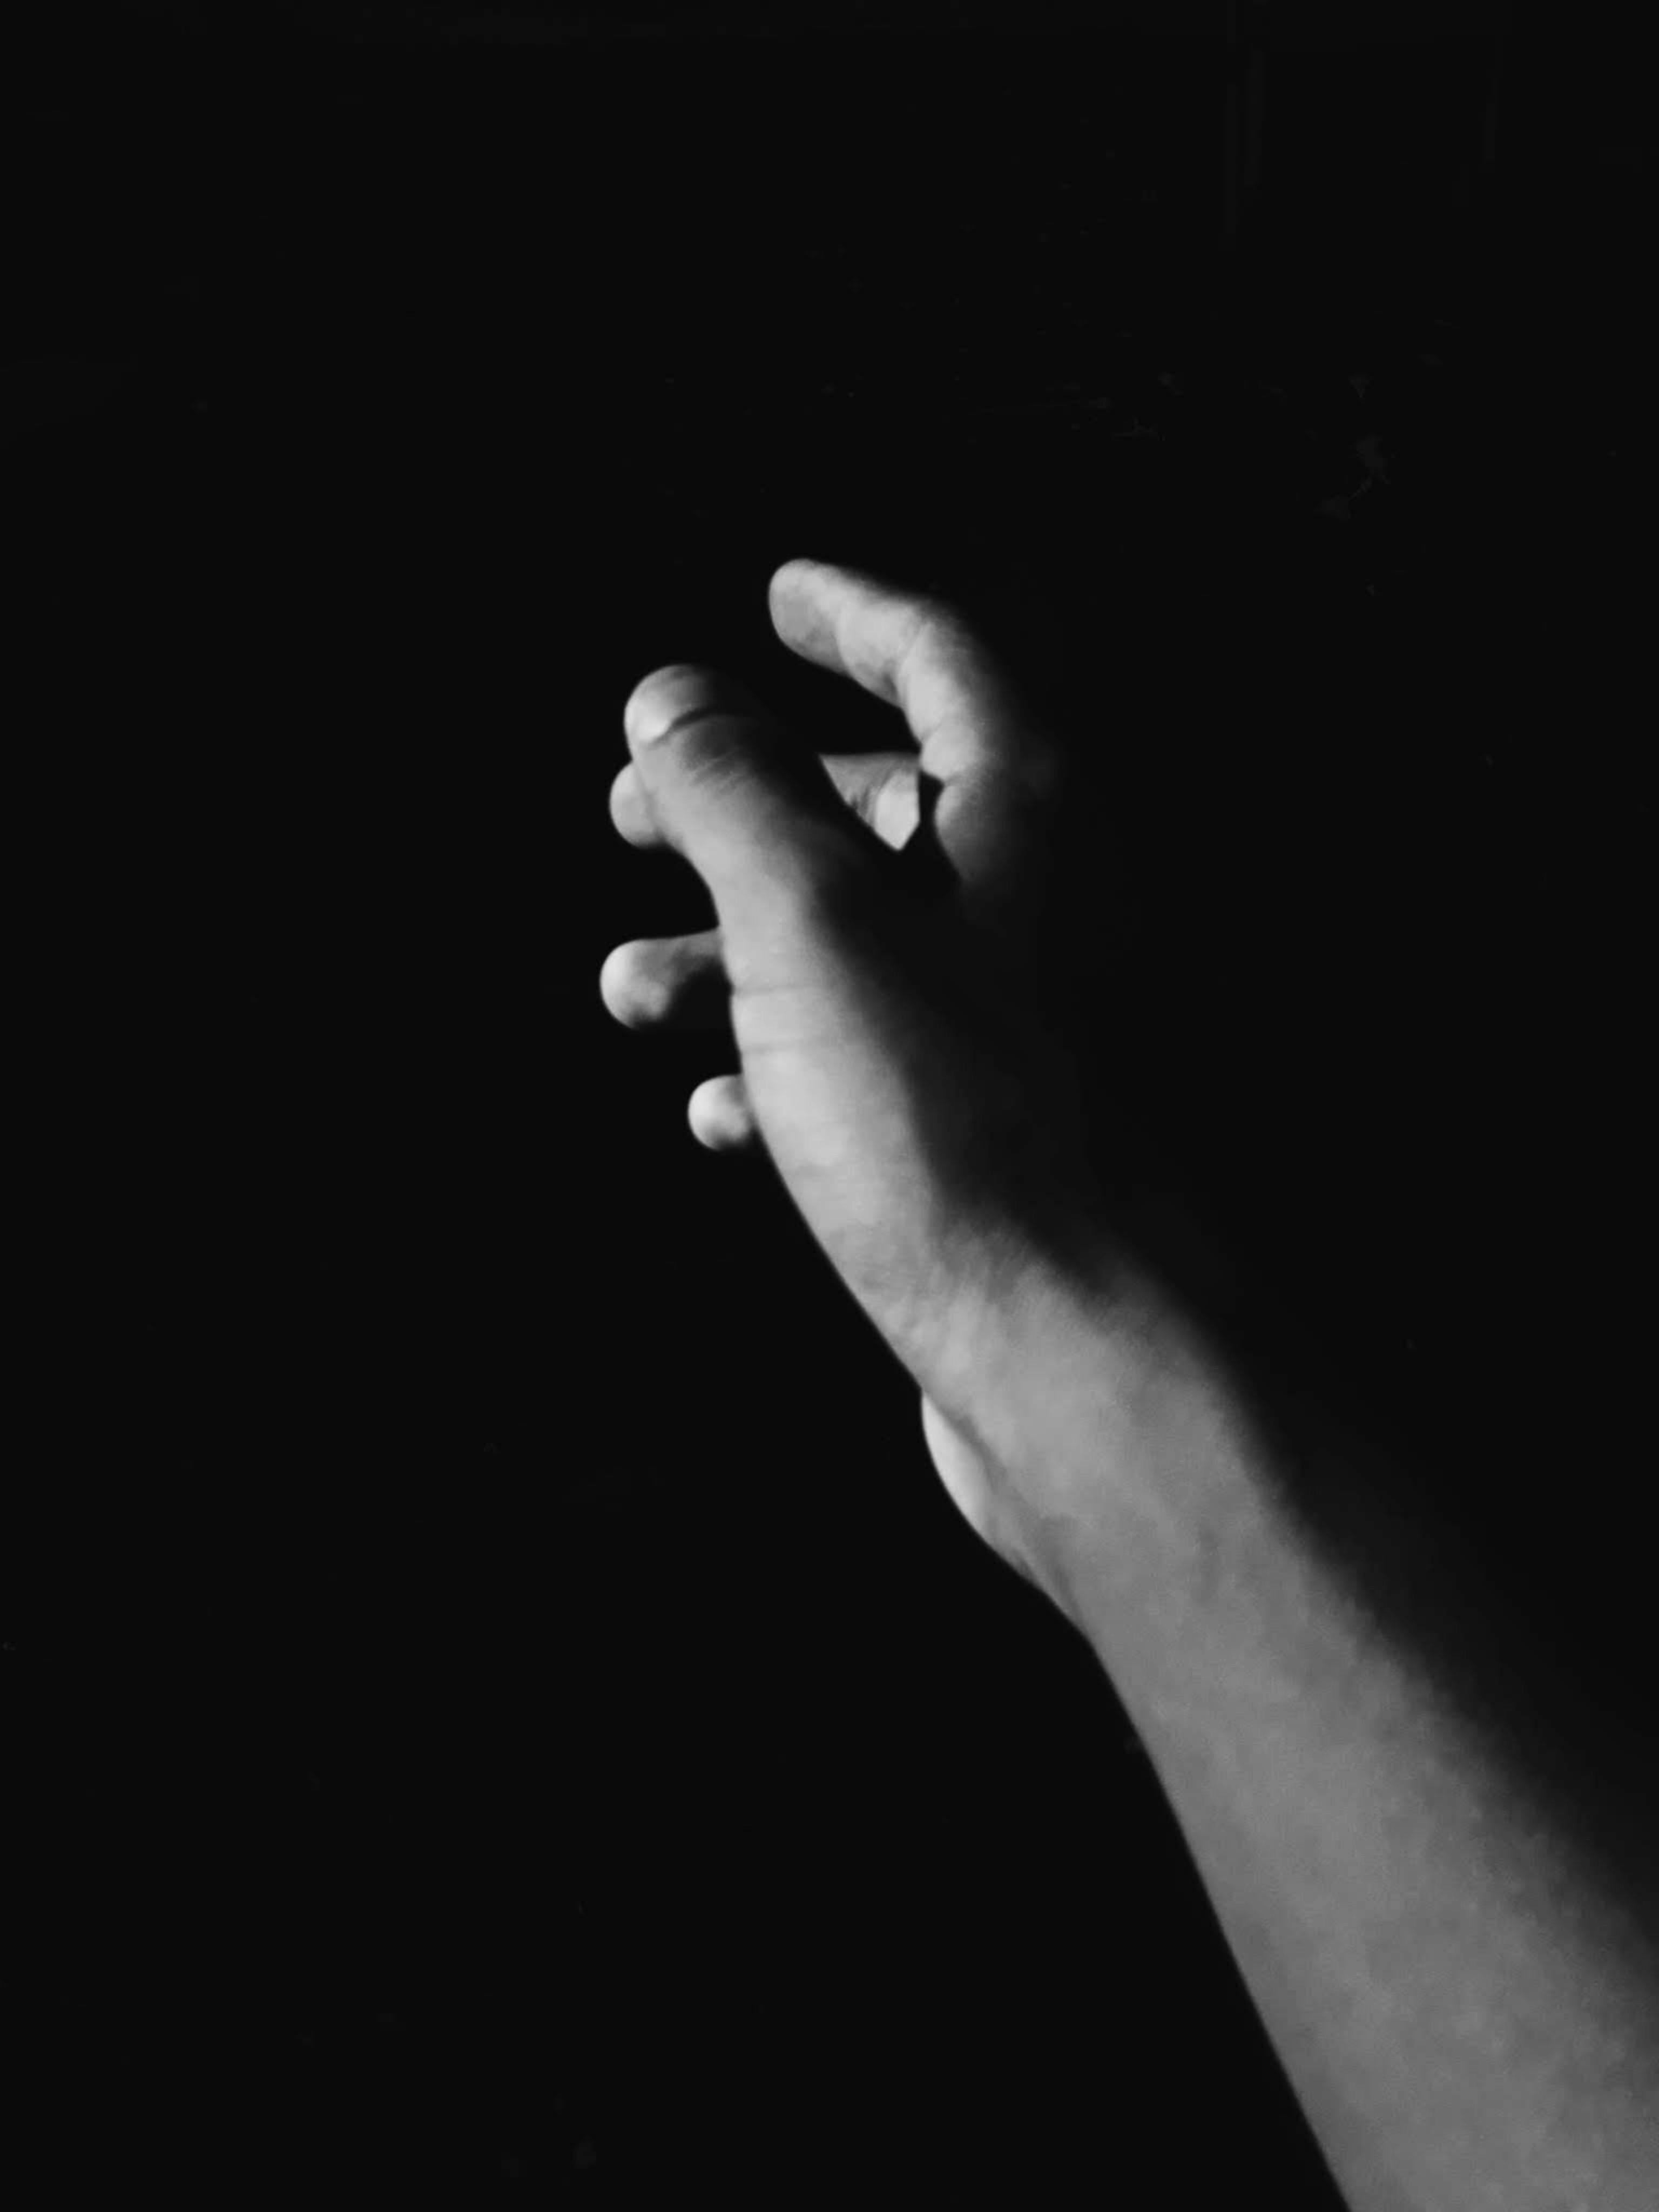 hands reaching out of darkness